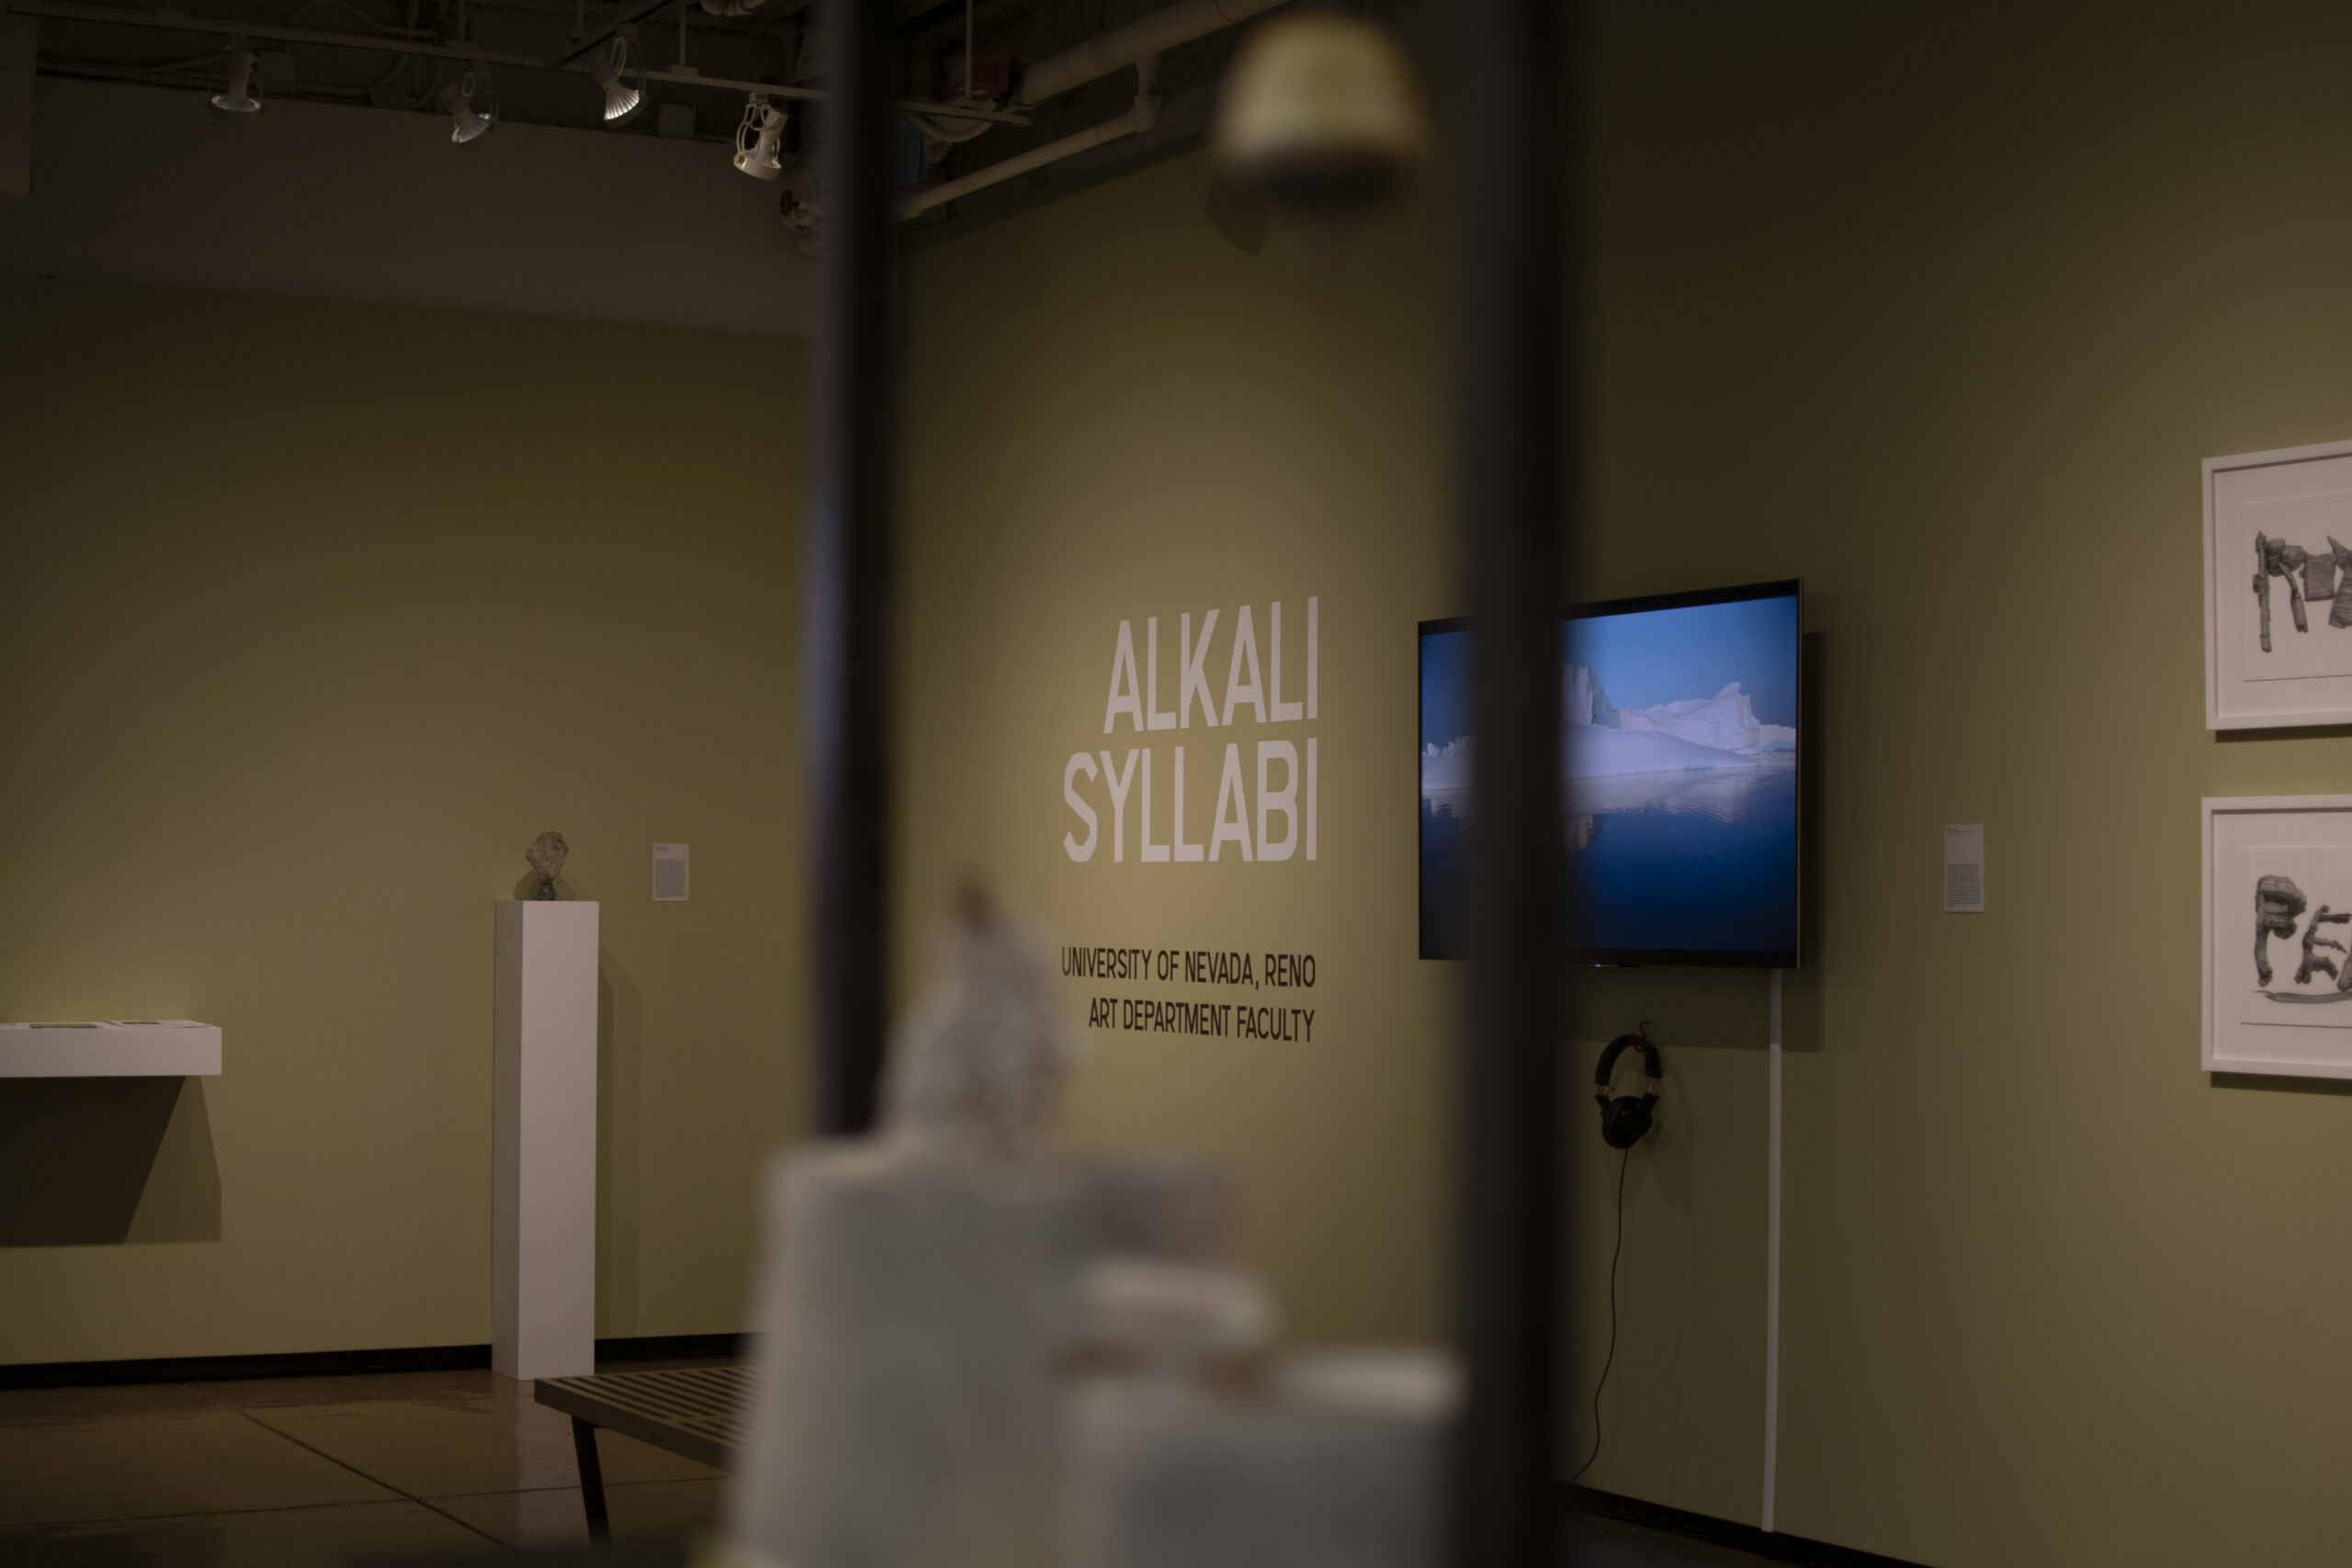 Brand-new Sheppard Contemporary and University Galleries curator presents “Alkali Syllabi,” showcasing a collection of works by UNR art faculty